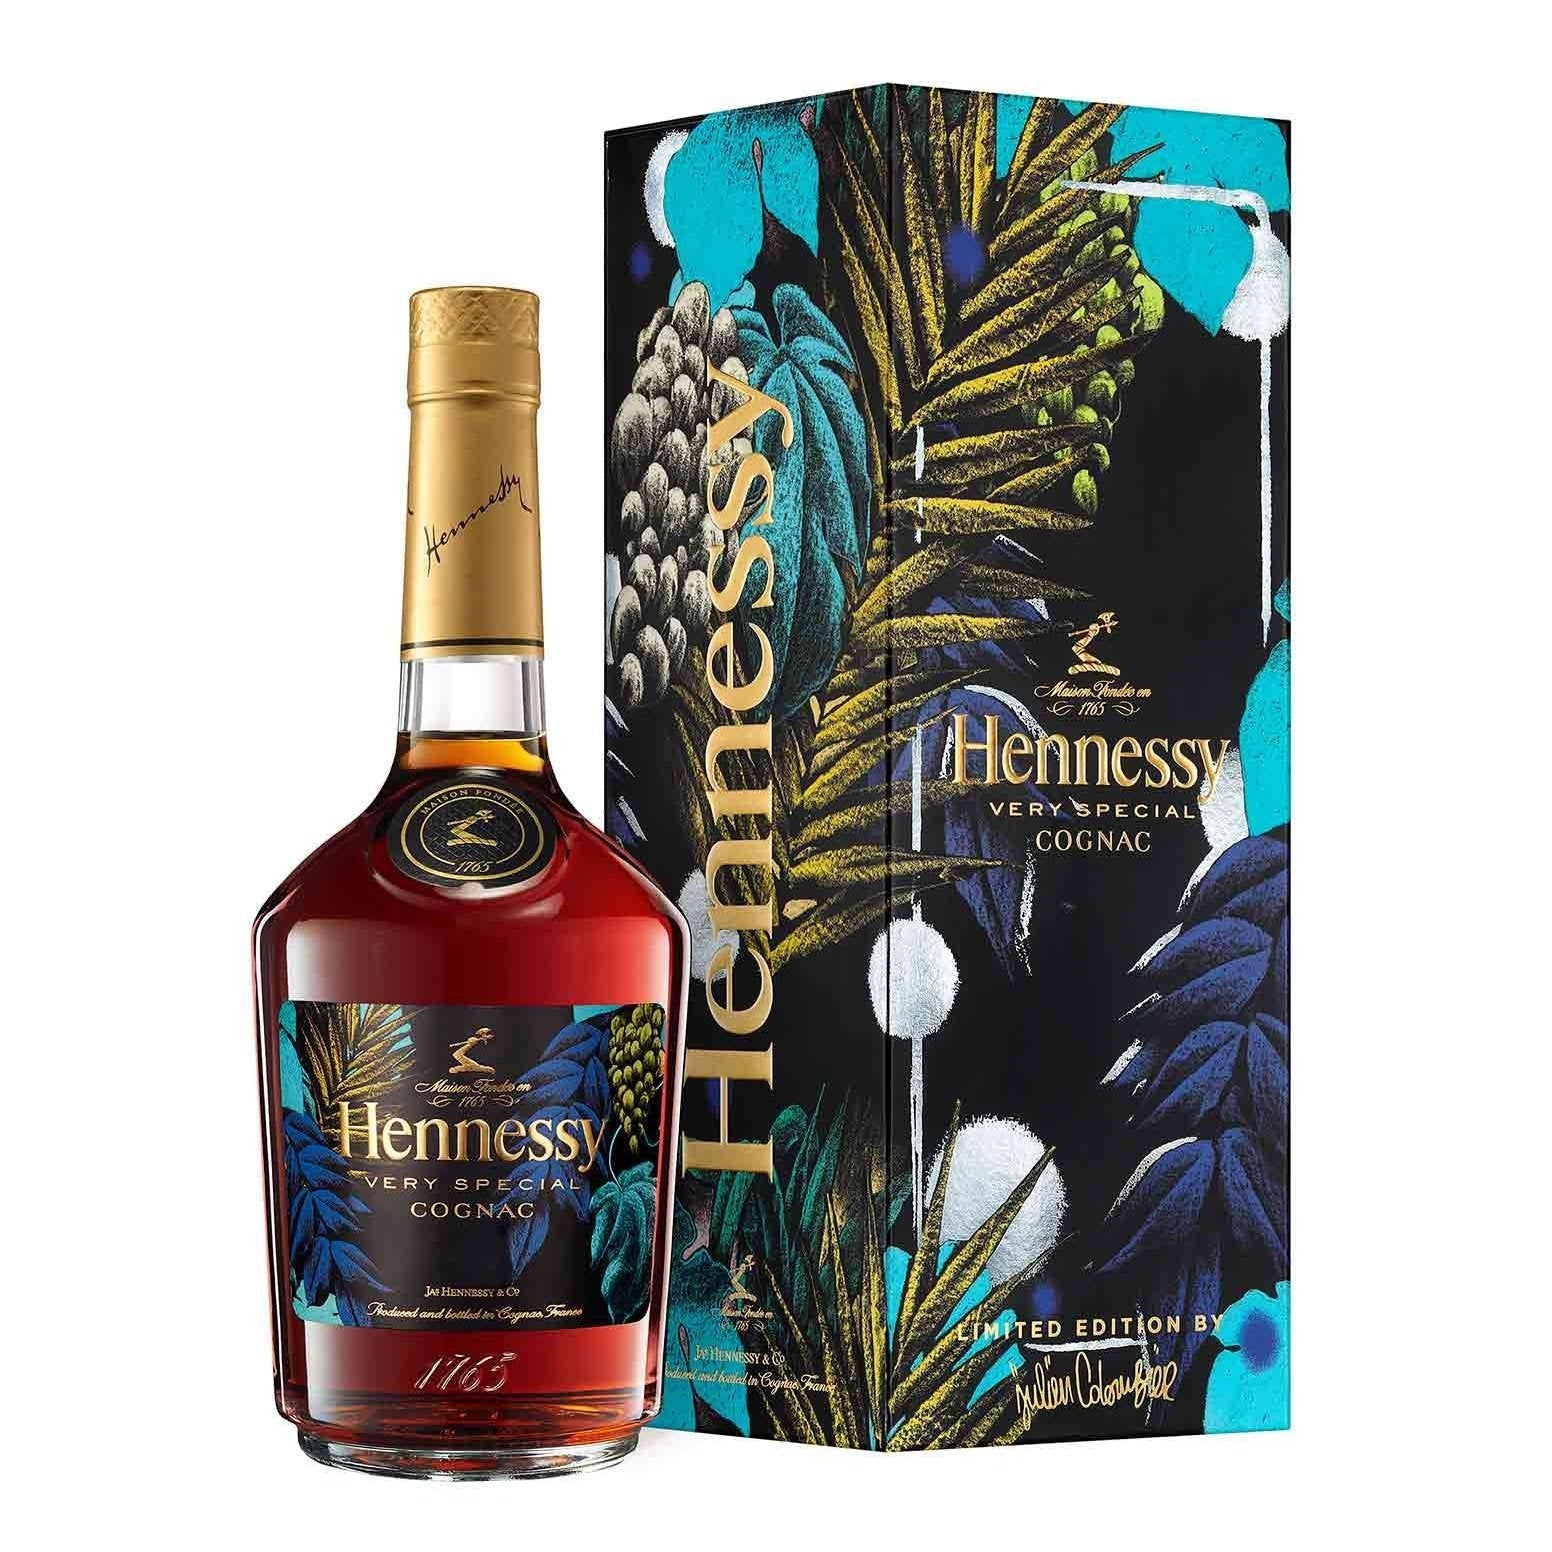 Hennessy X.O and Kim Jones Partner Up For One-Of-A-Kind